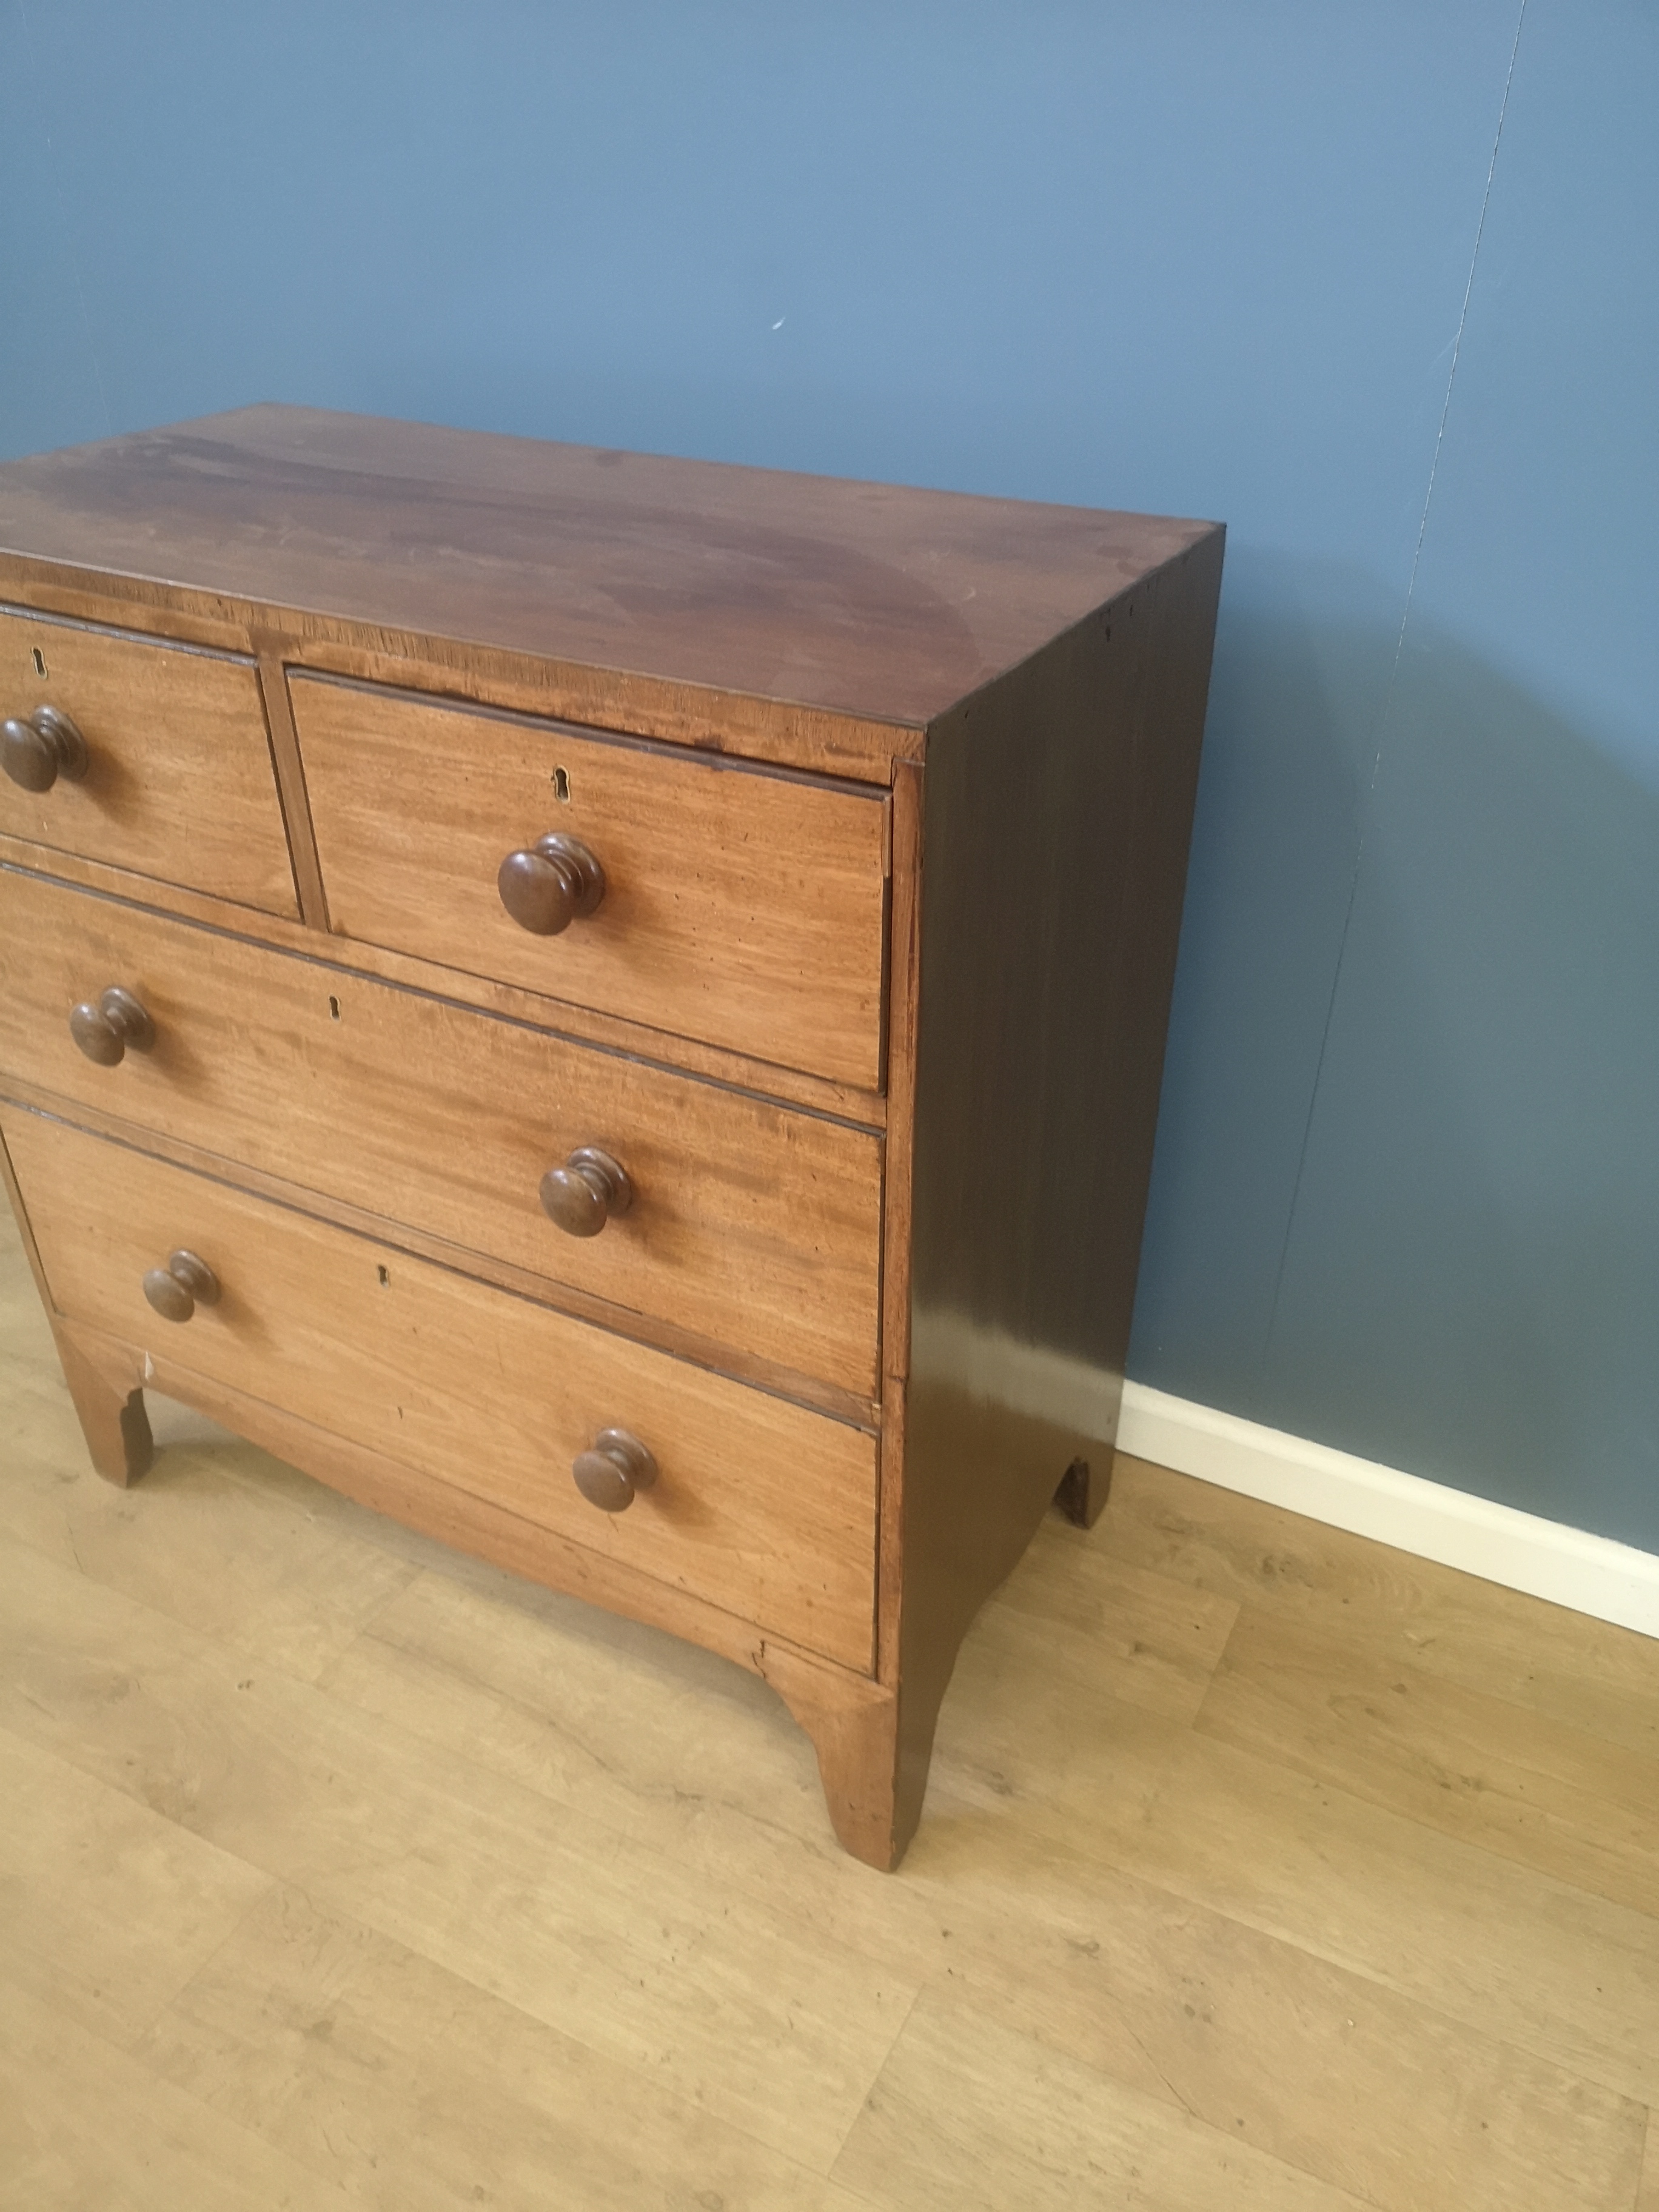 Victorian mahogany chest of drawers - Image 4 of 4